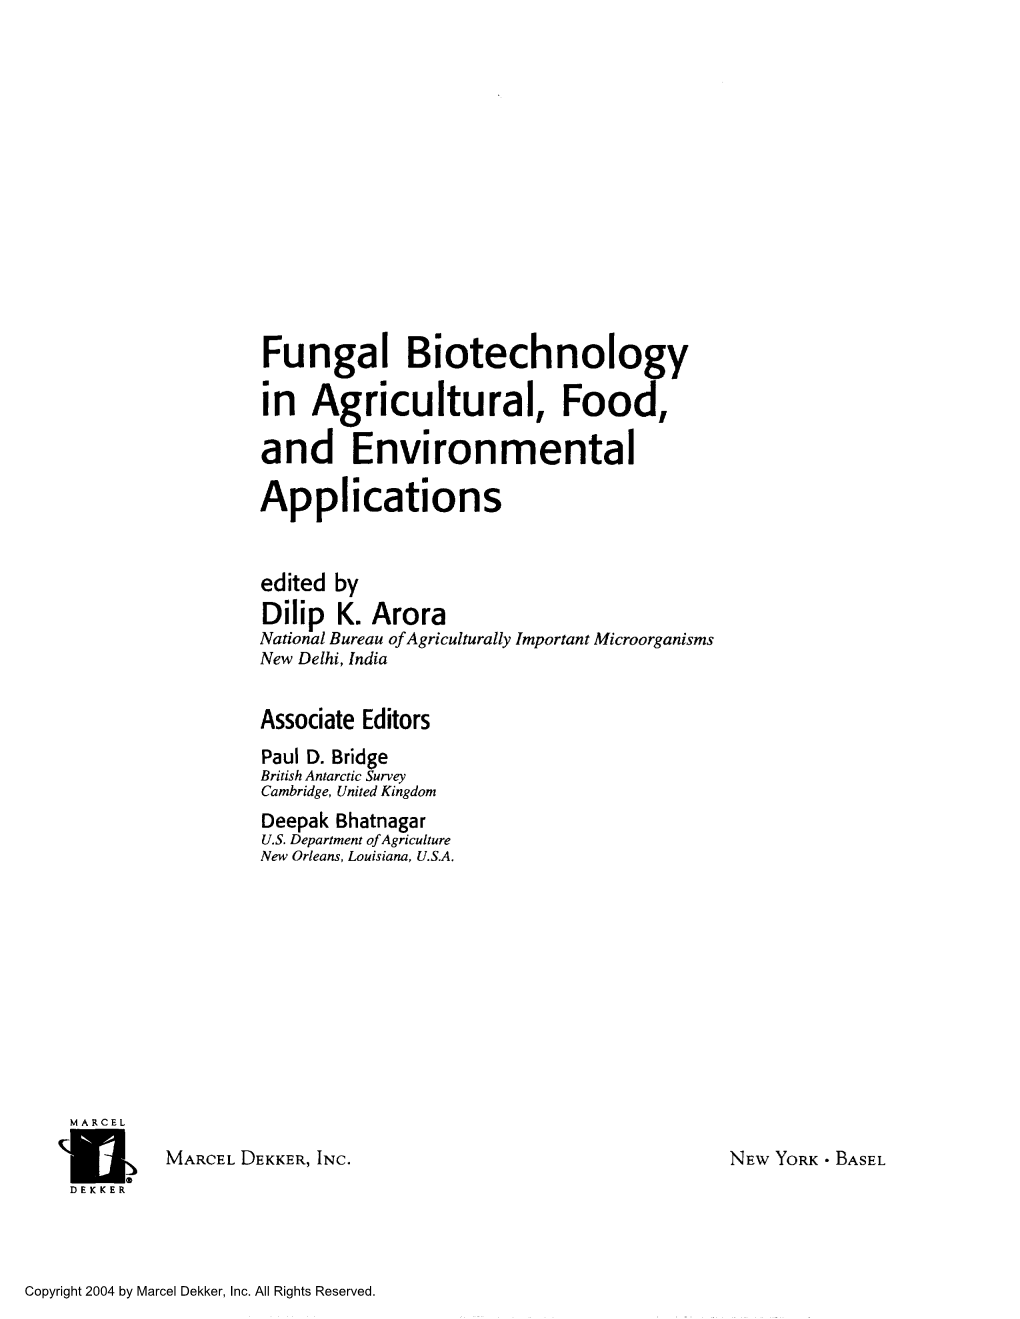 Fungal Biotechnoiogy in Agricultural, Food,And Environmental Applications